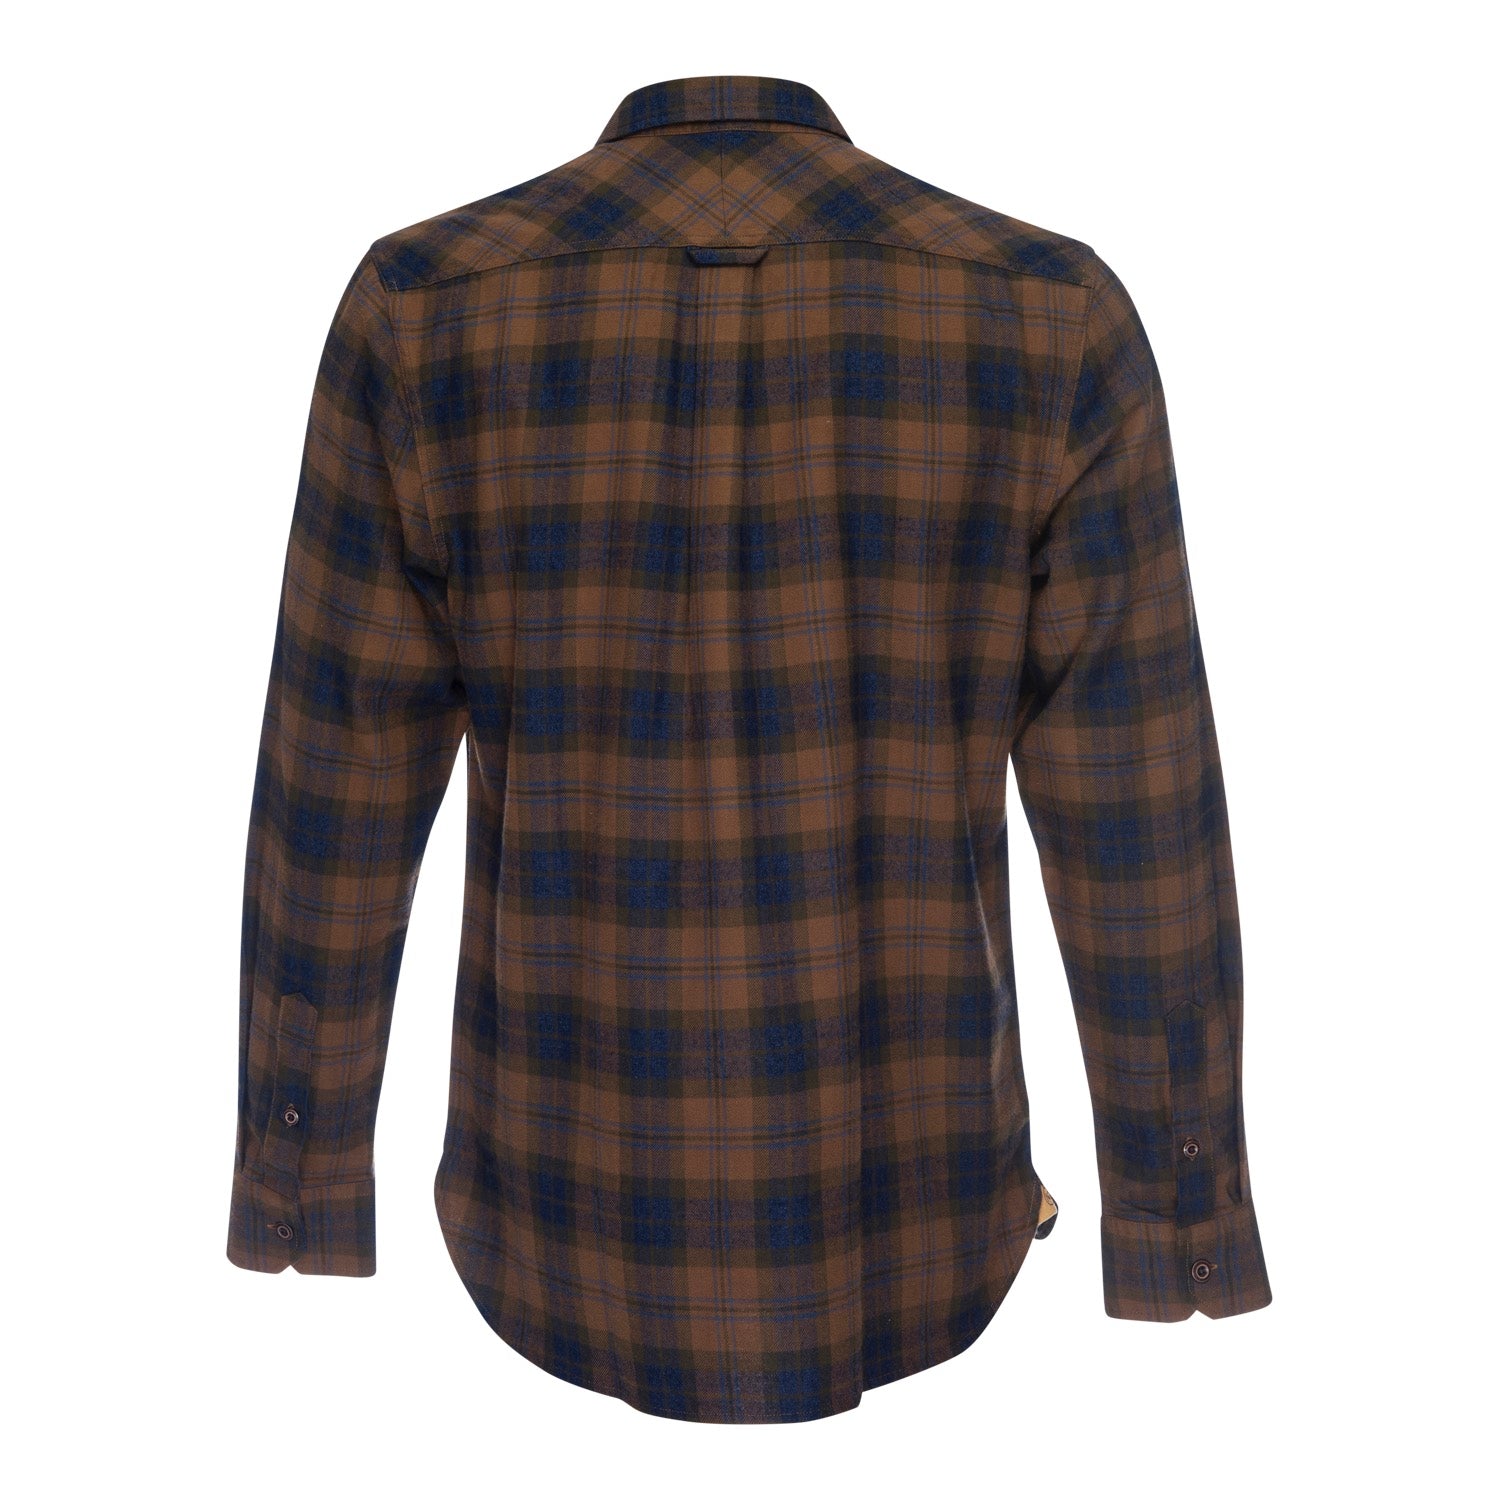 Truman Outdoor Shirt in Gold Plaid